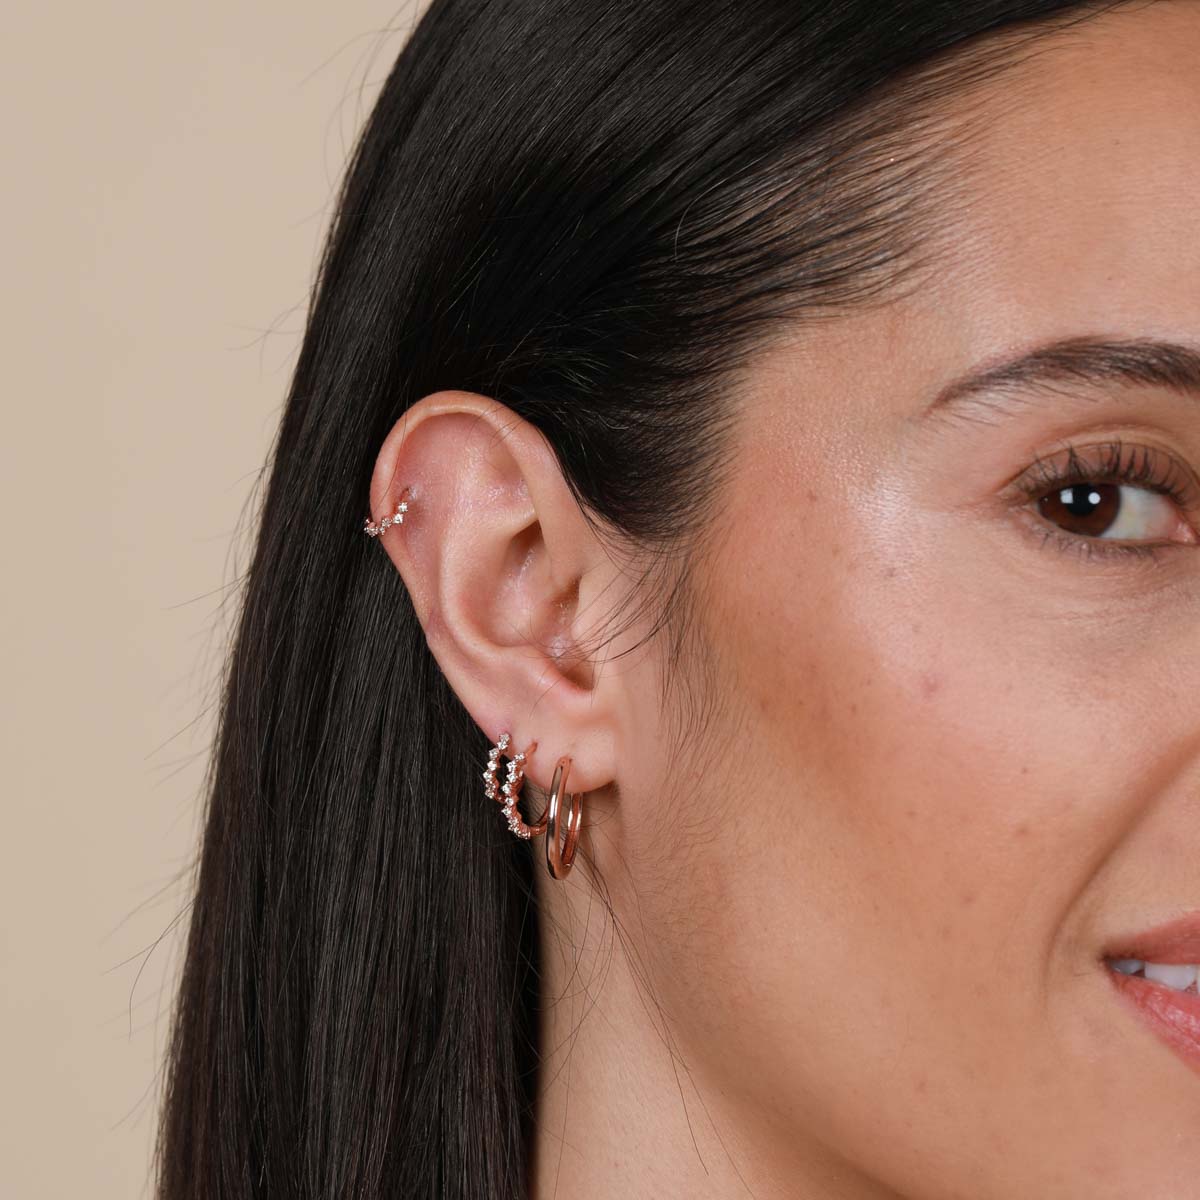 Stunning Helix Piercing Jewelry for Every Style